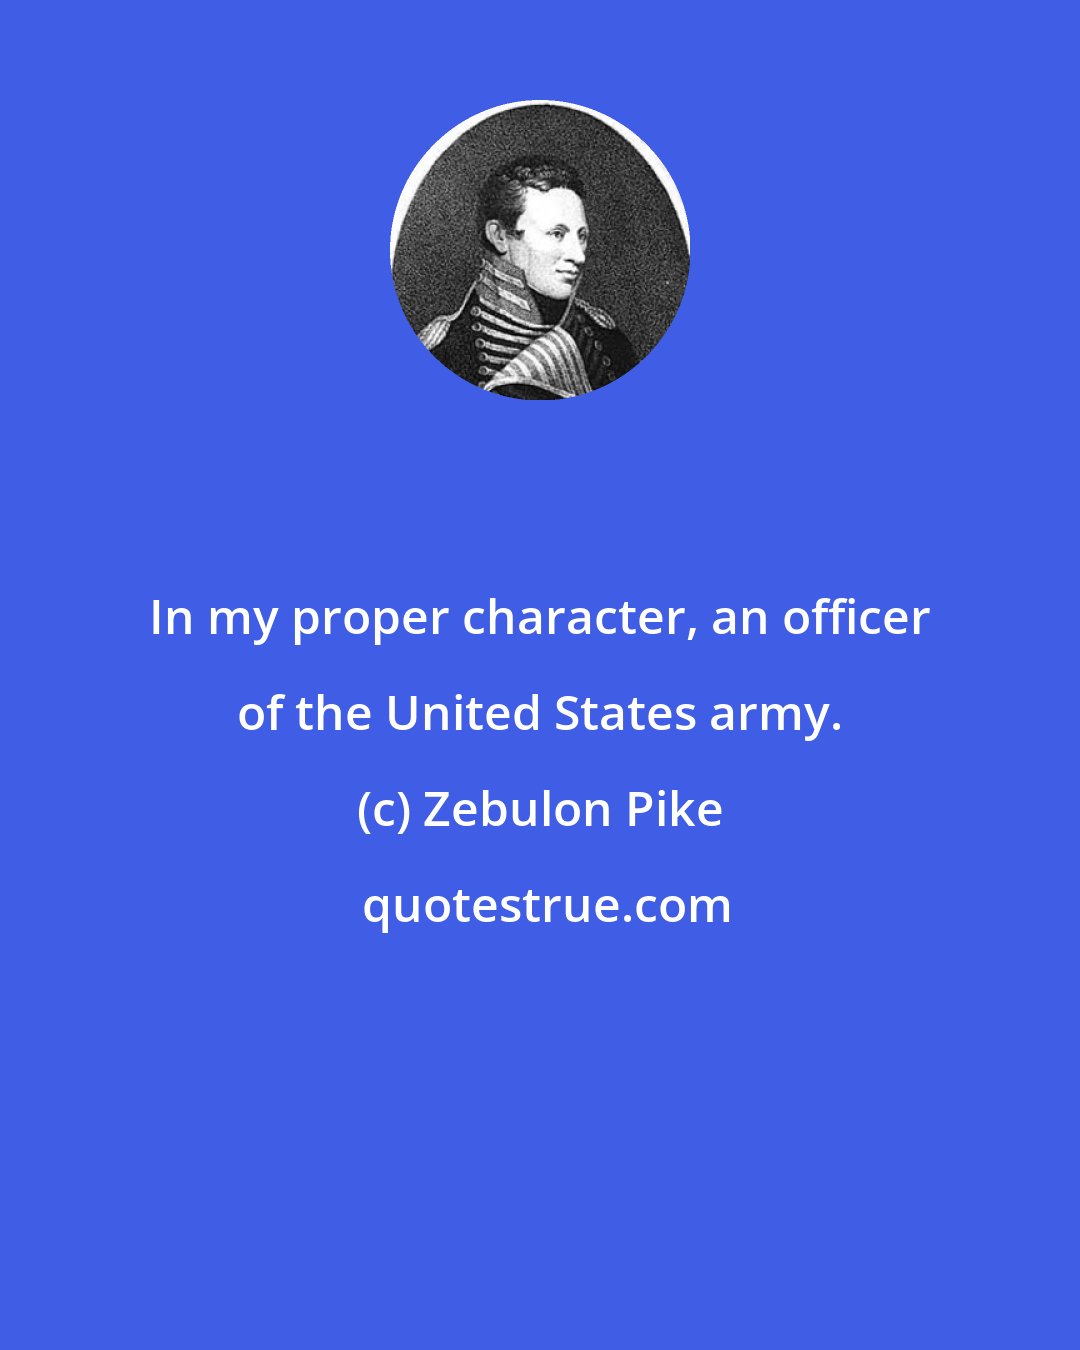 Zebulon Pike: In my proper character, an officer of the United States army.